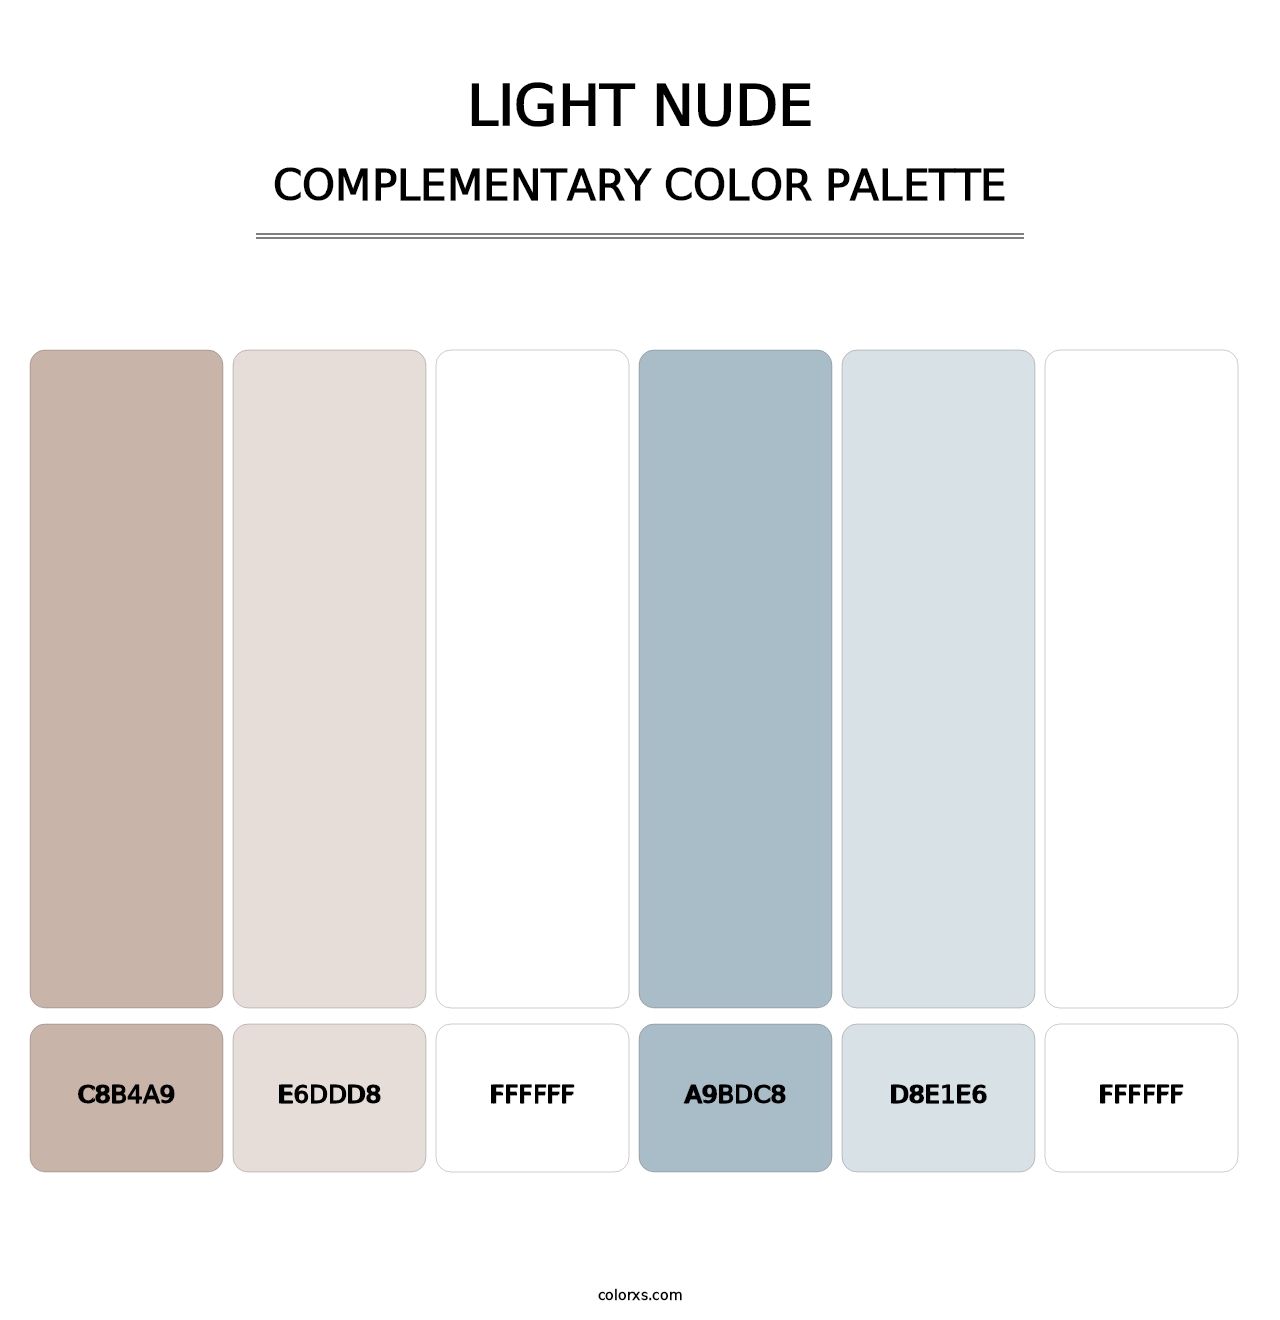 Light Nude - Complementary Color Palette